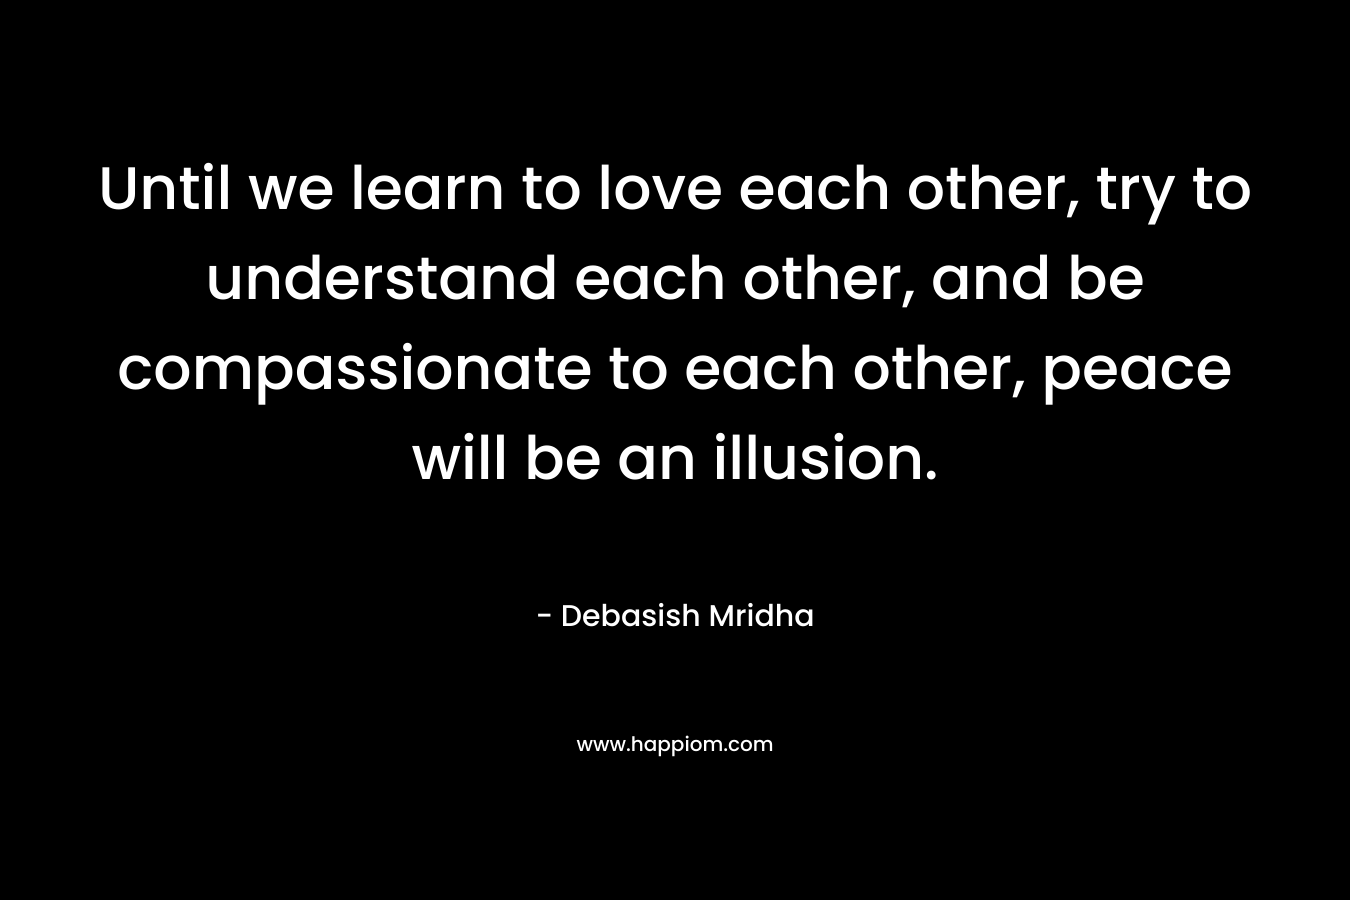 Until we learn to love each other, try to understand each other, and be compassionate to each other, peace will be an illusion.